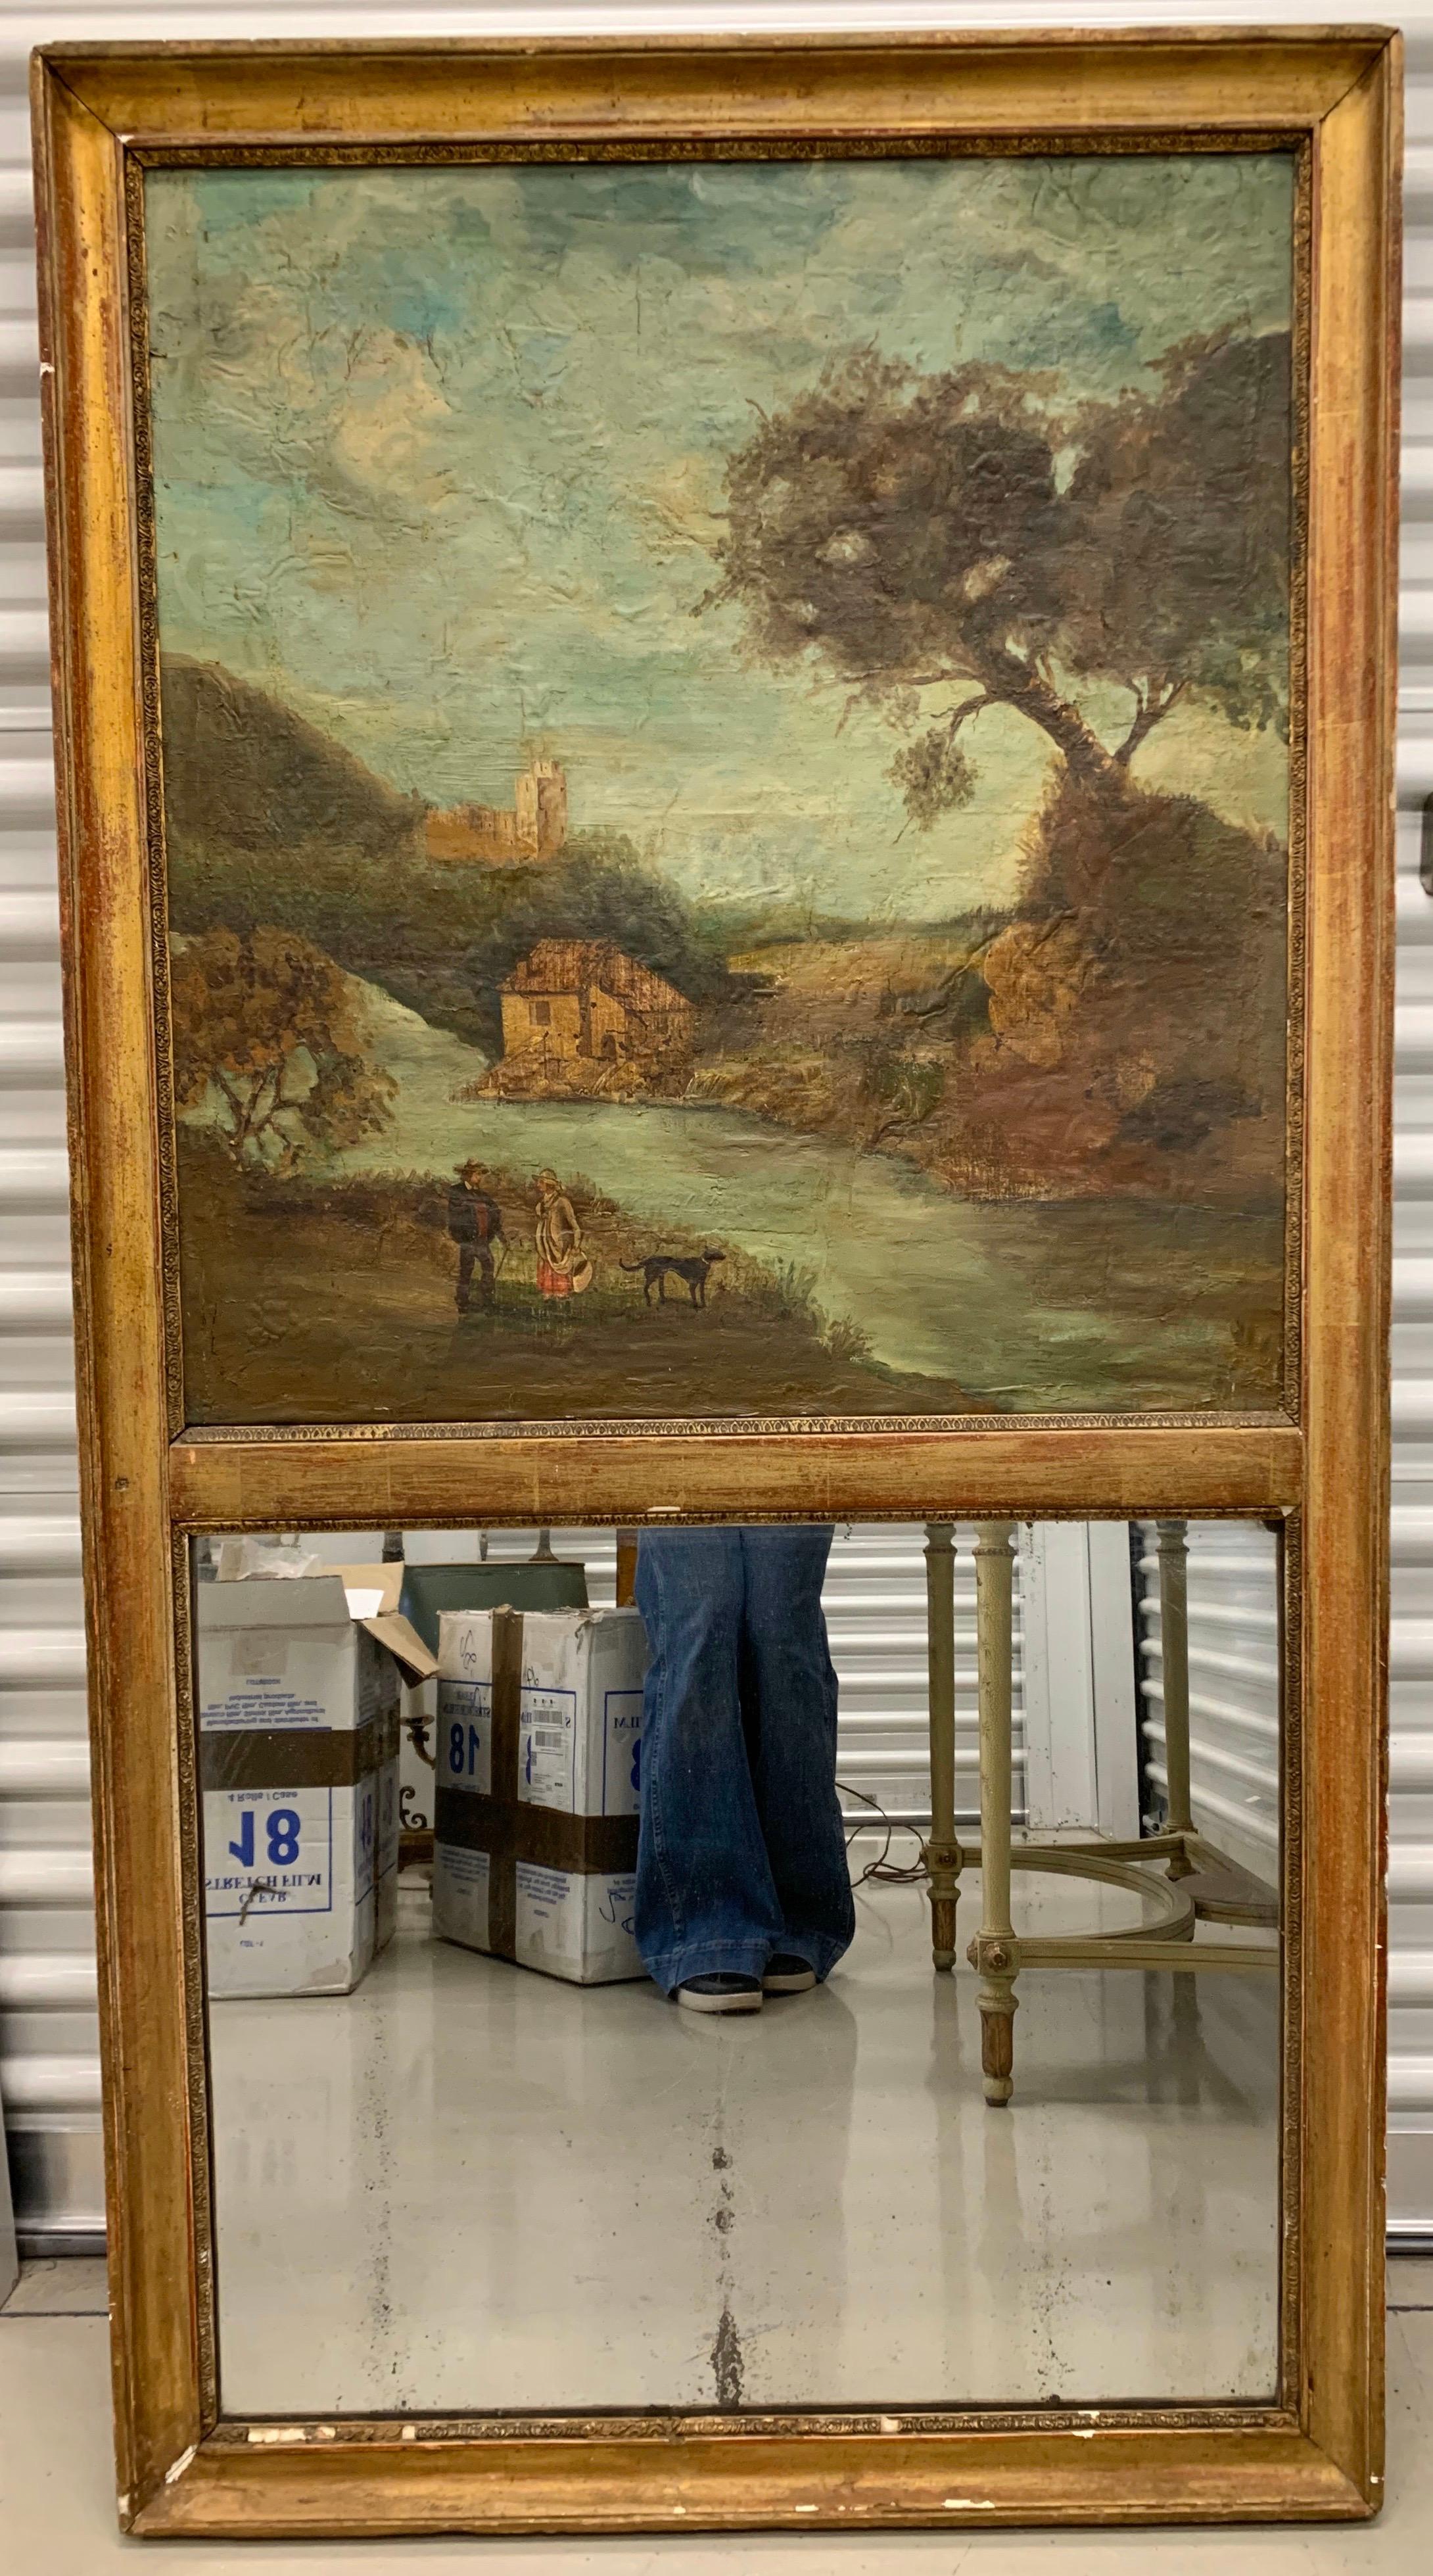 Stunning early 19th century French Trumeau antique giltwood mirror with original oil on canvas painting
of a landscape scene at top. The mirror has the perfect patina given its age and the painting is still in good condition with minimal flaws (see